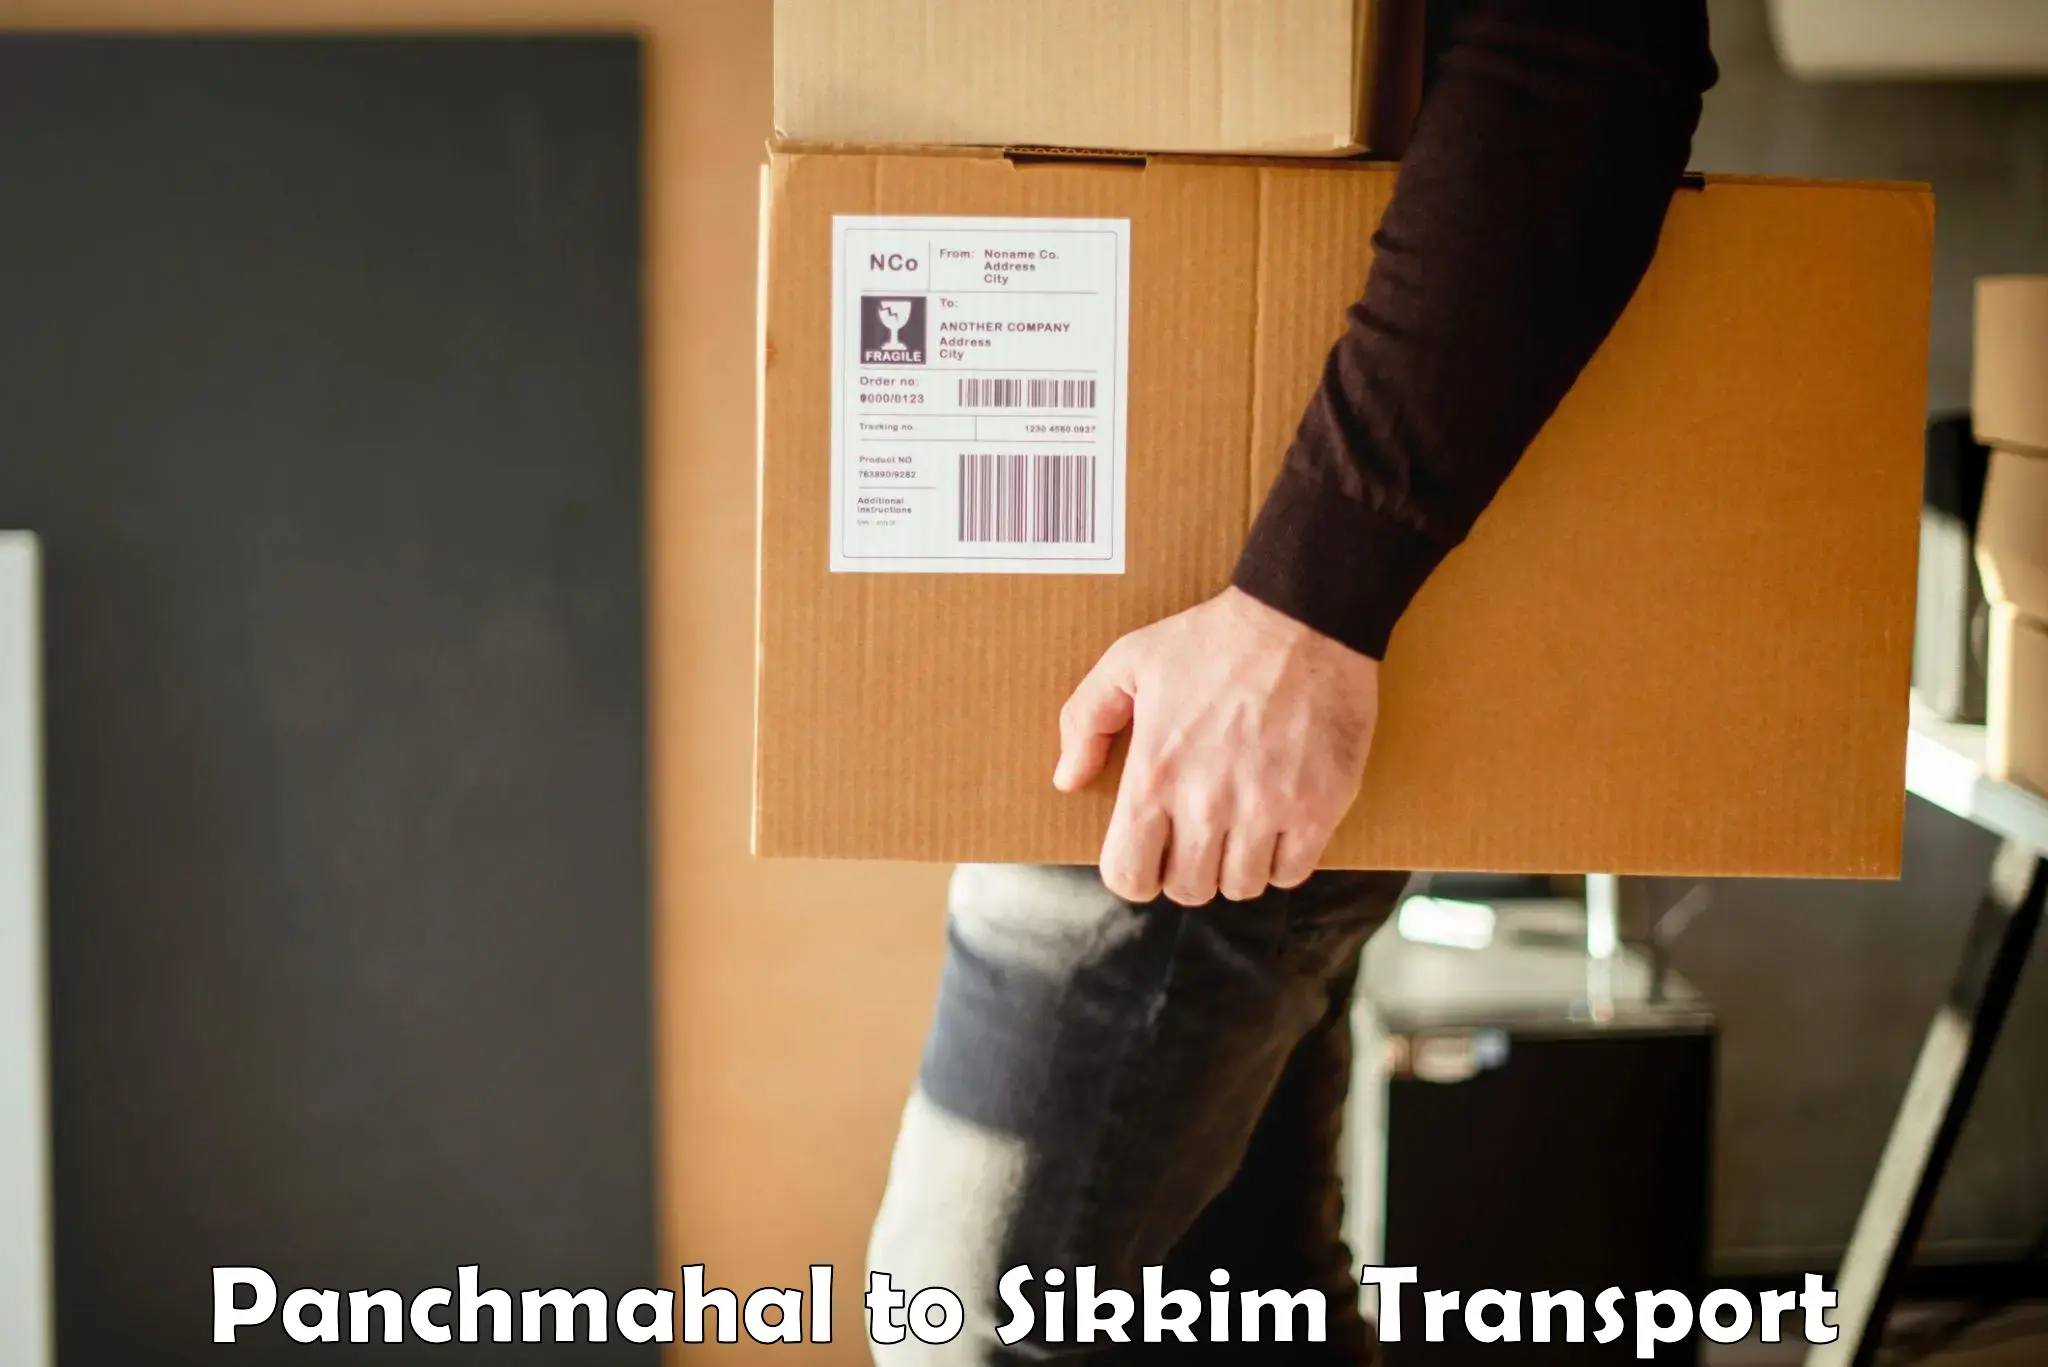 Shipping partner Panchmahal to West Sikkim